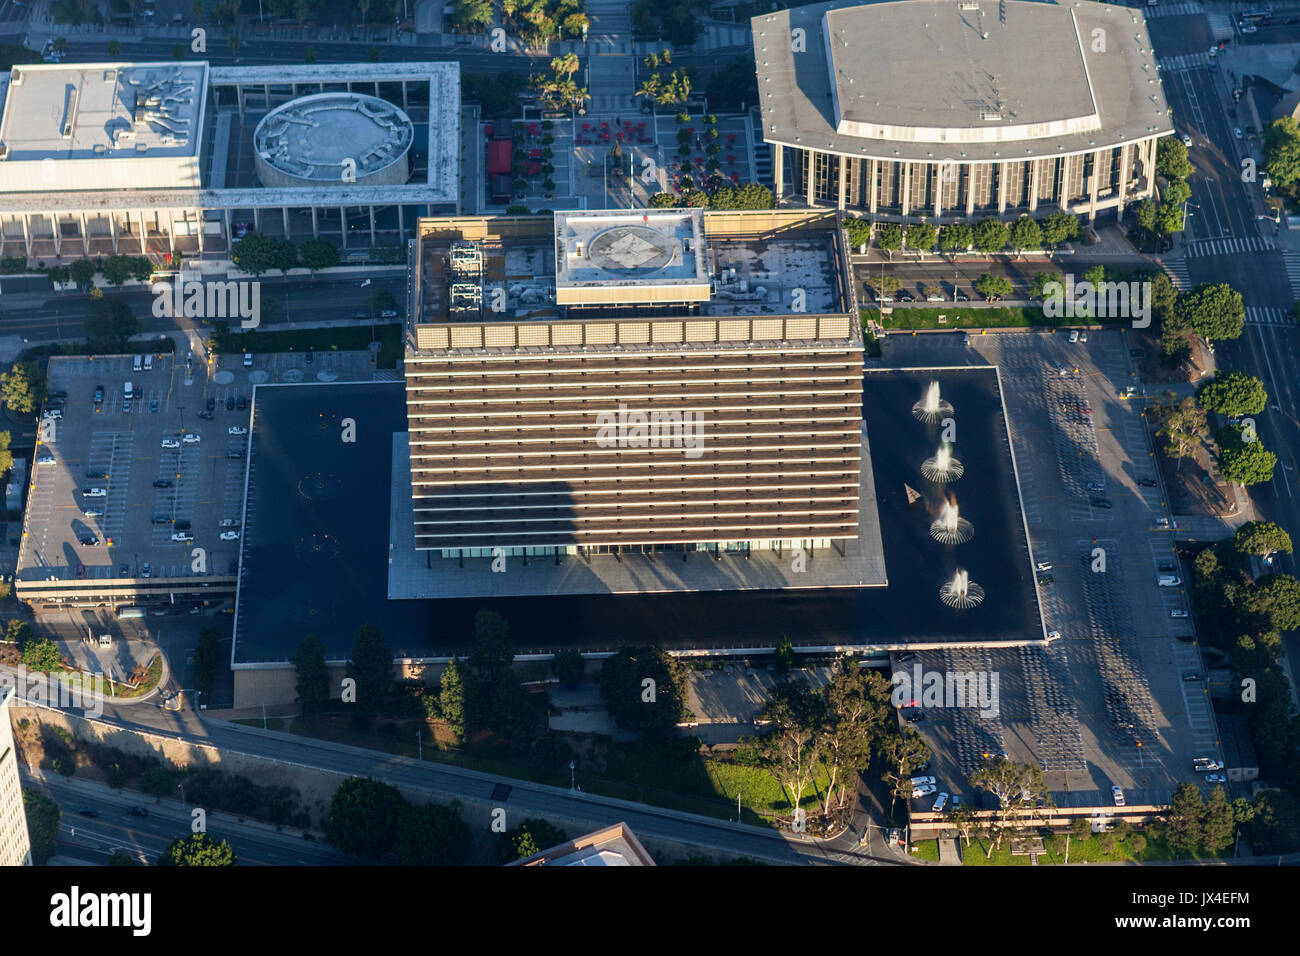 Los Angeles, California, USA - August 7, 2017:  Aerial view of the LA Department of Water and Power headquarters building in downtown. Stock Photo